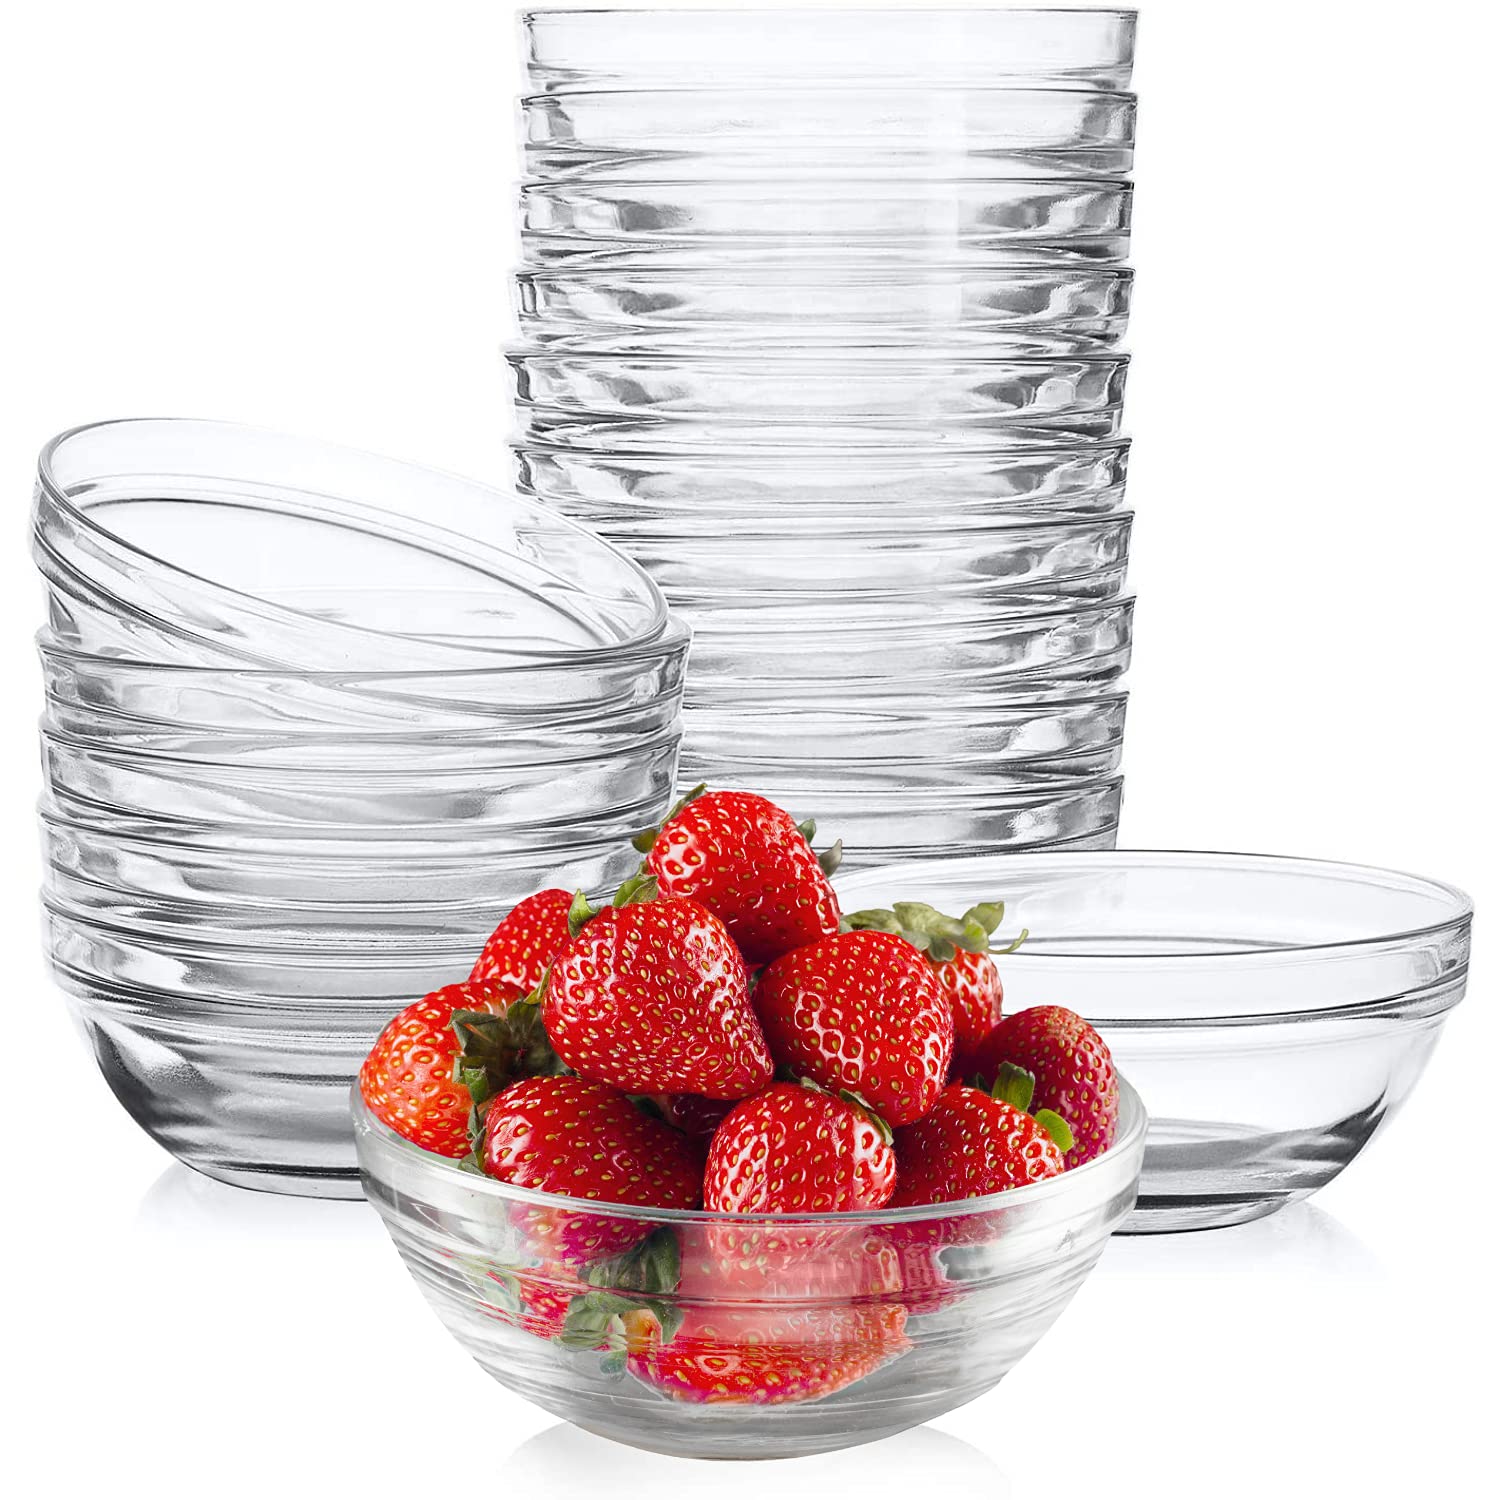 Osnell USA 35 Inch Mini Meal Prep Bowls - Glass Ramekins Bowls Stackable  Clear Serving Bowls Bowl For Salad, Dessert, Dips, Nut Candy Di